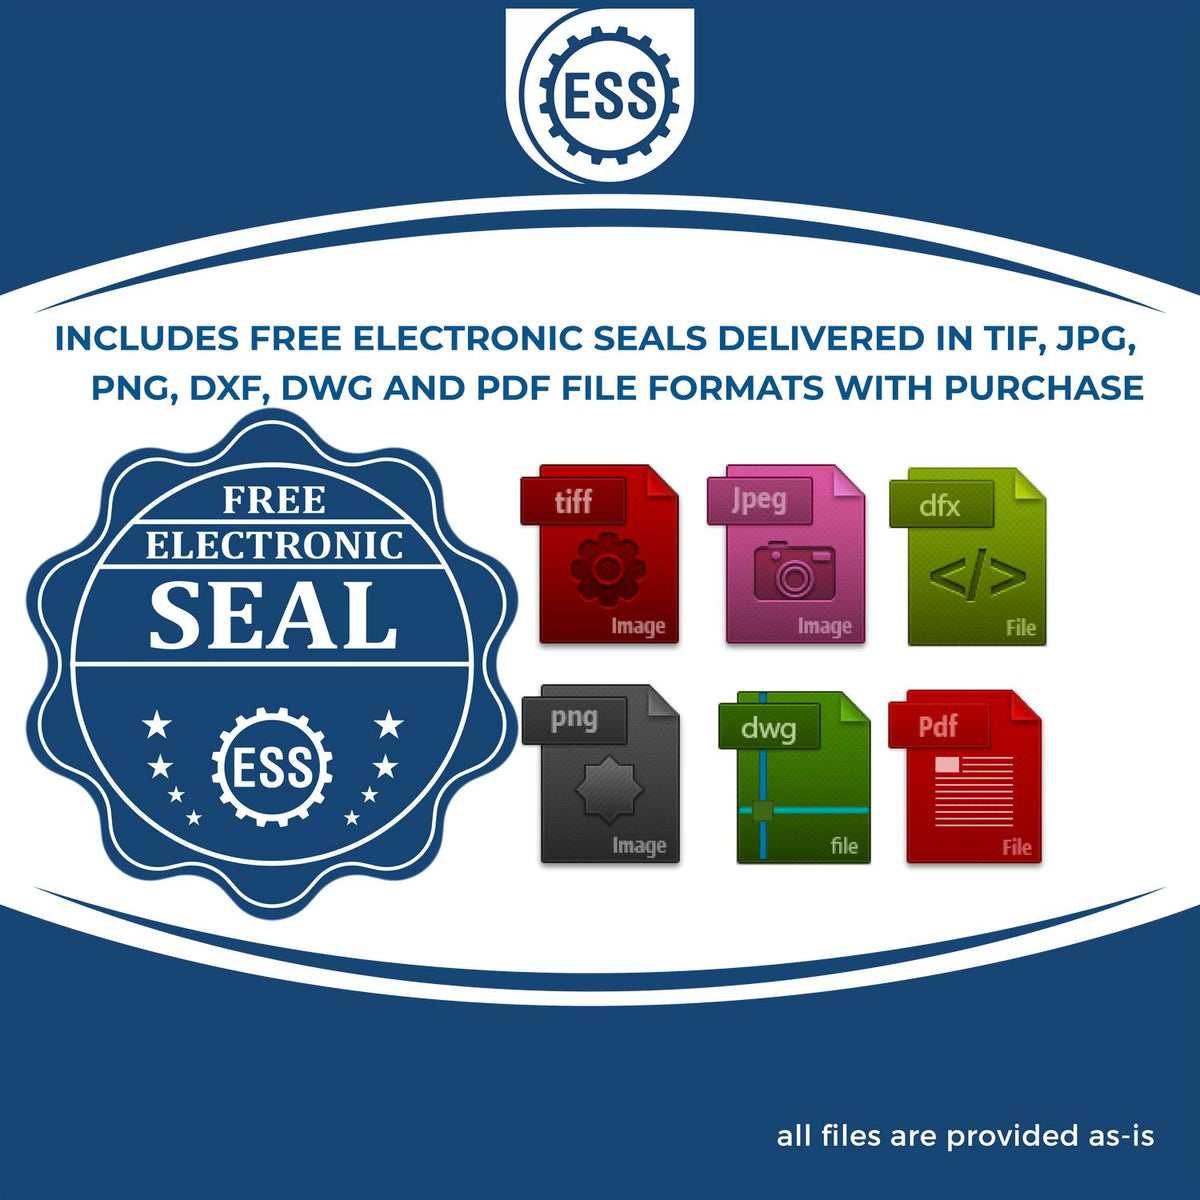 An infographic for the free electronic seal for the Handheld Ohio Professional Geologist Embosser illustrating the different file type icons such as DXF, DWG, TIF, JPG and PNG.